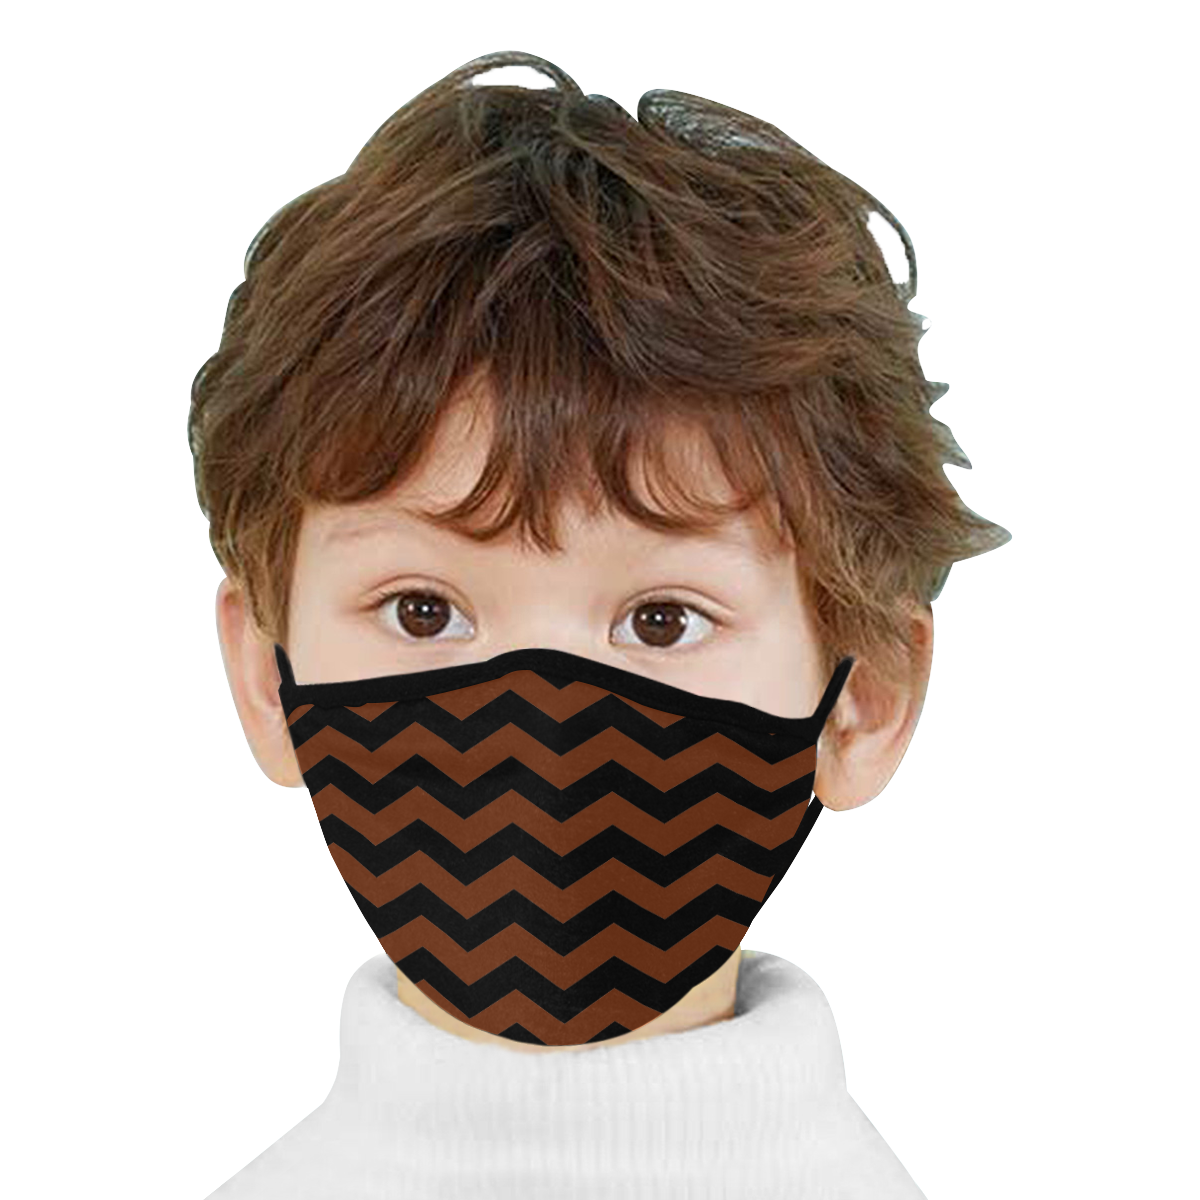 Chevrons black on brown Mouth Mask